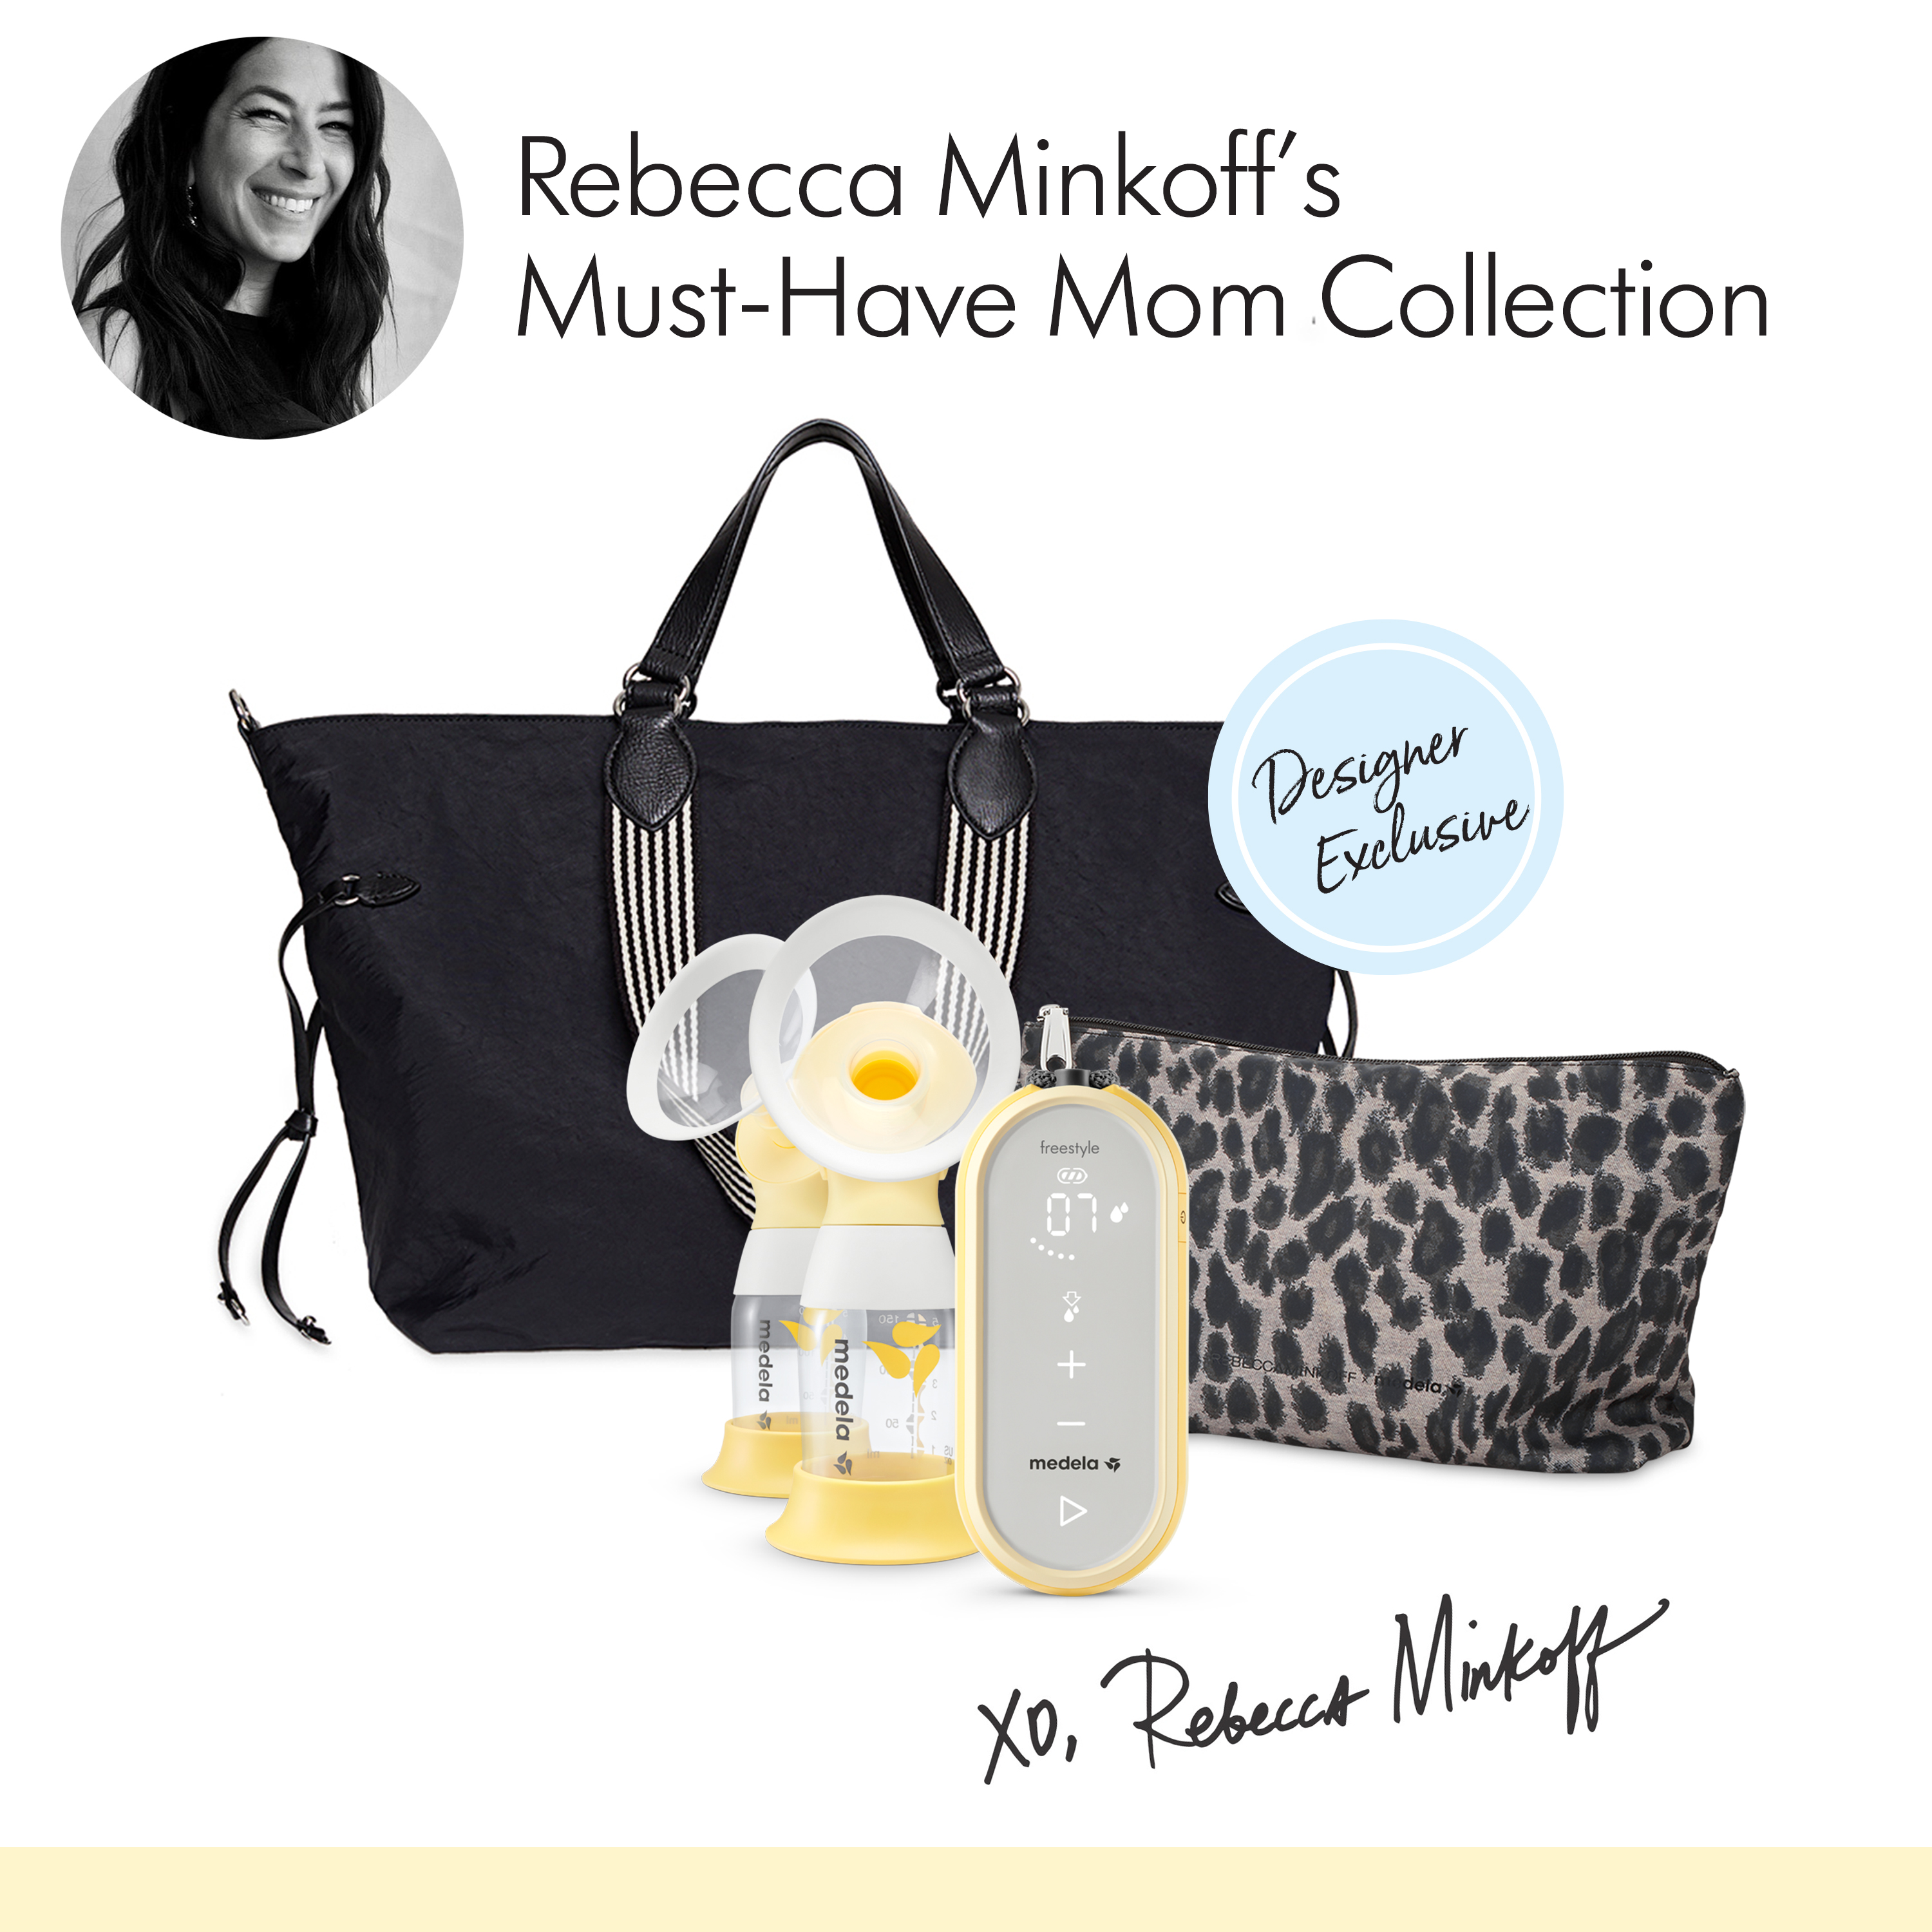 Medela Teams Up with Rebecca Minkoff on Exclusive